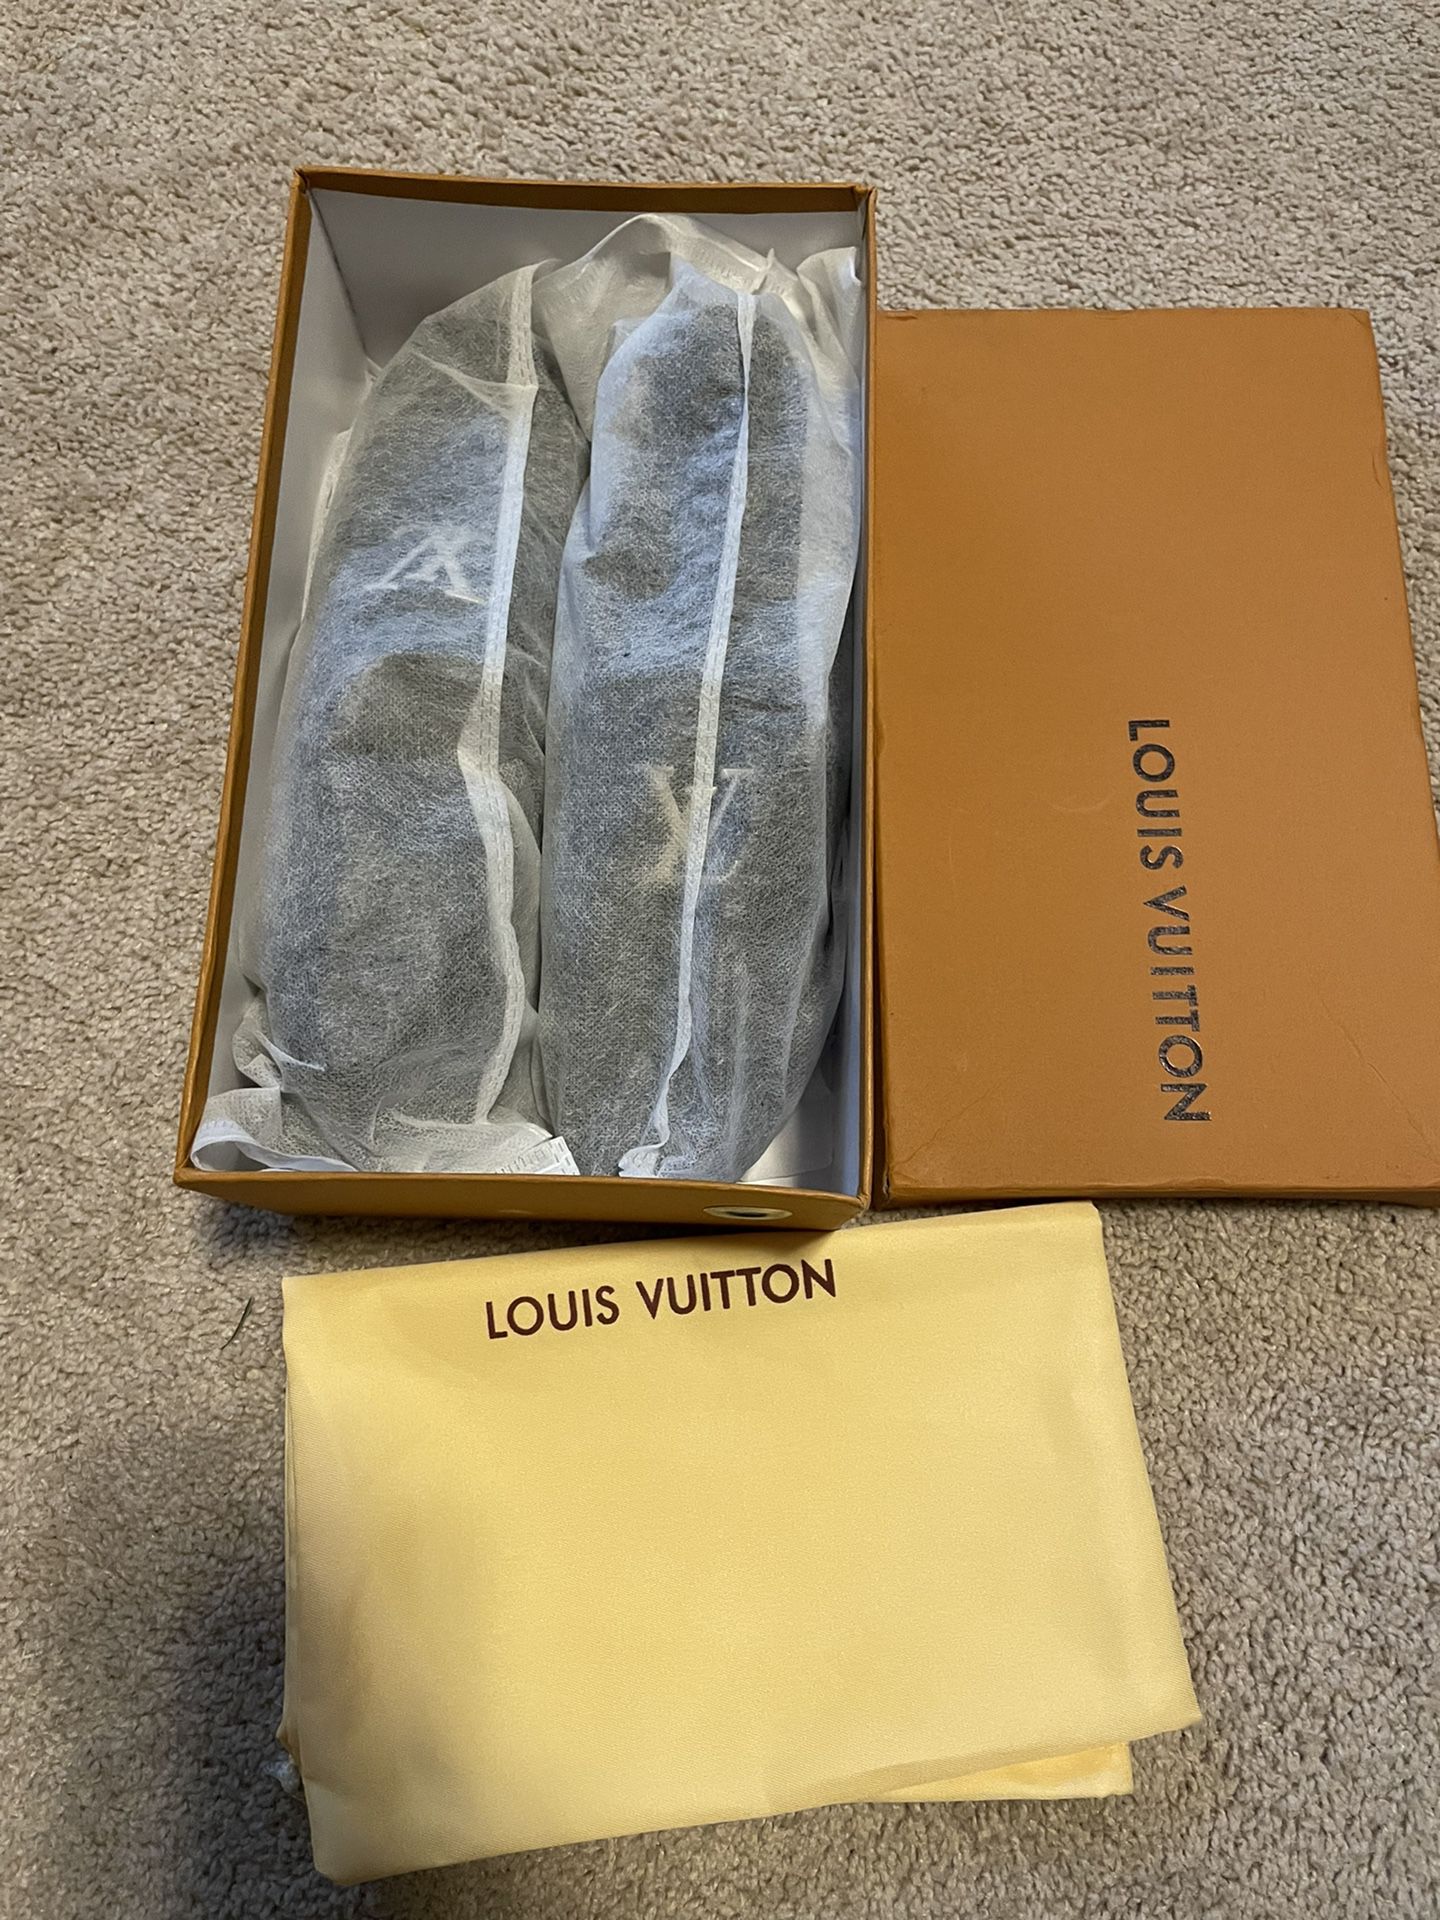 LV-Louis Vuitton Heels Size 8- 9\10 condition 100$ Or best Offer for Sale  in Puyallup, WA - OfferUp